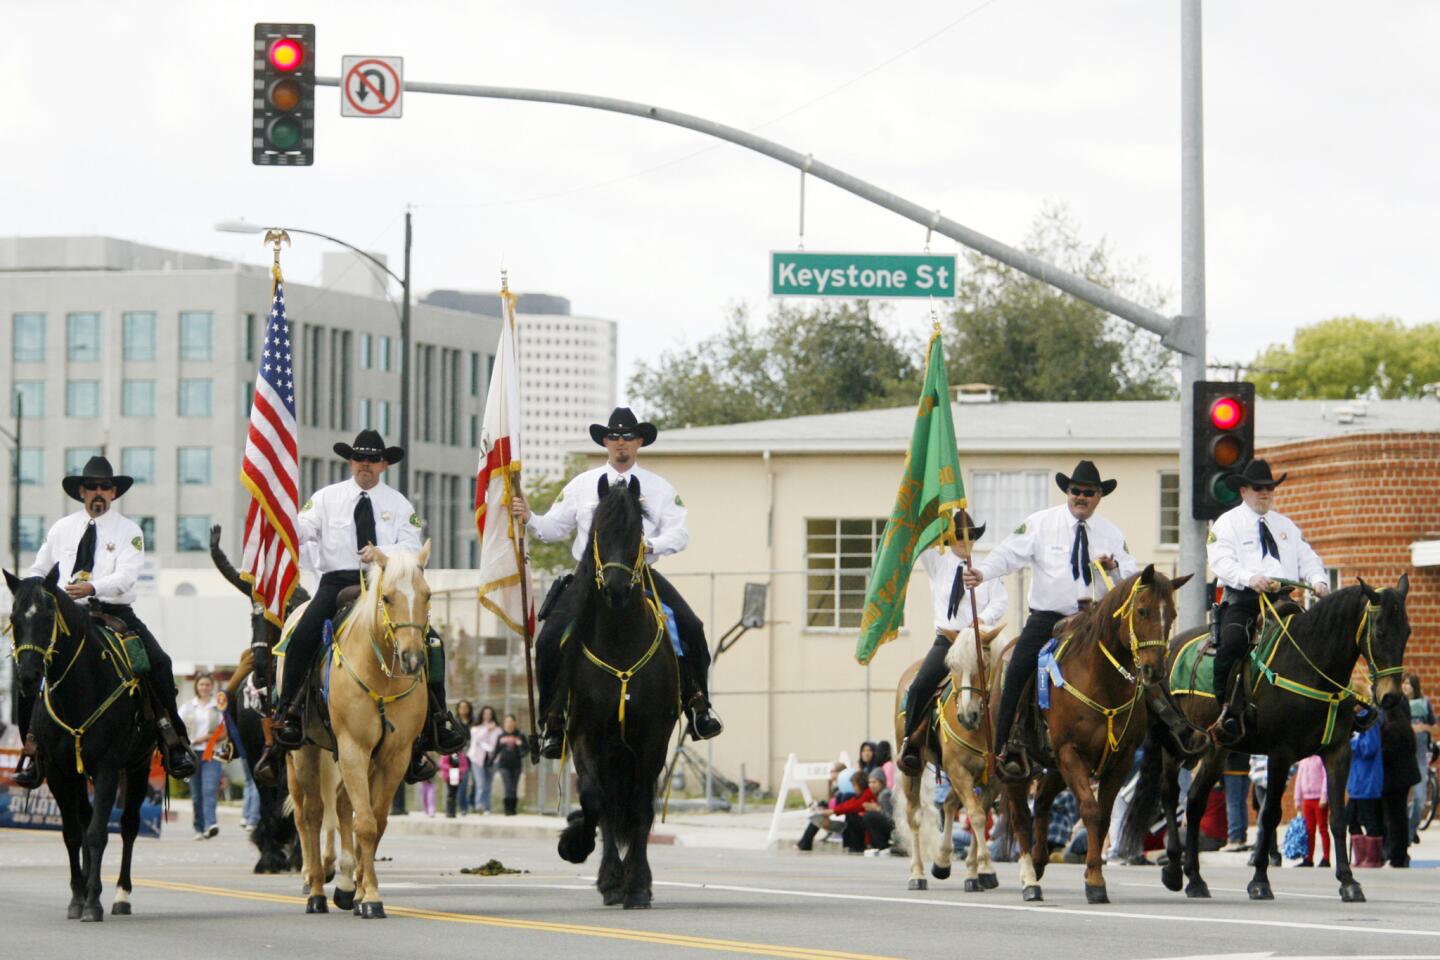 Participants march in Burbank on Parade, which took place on Olive Ave. between Keystone St. and Lomita St. on Saturday, April 14, 2012.